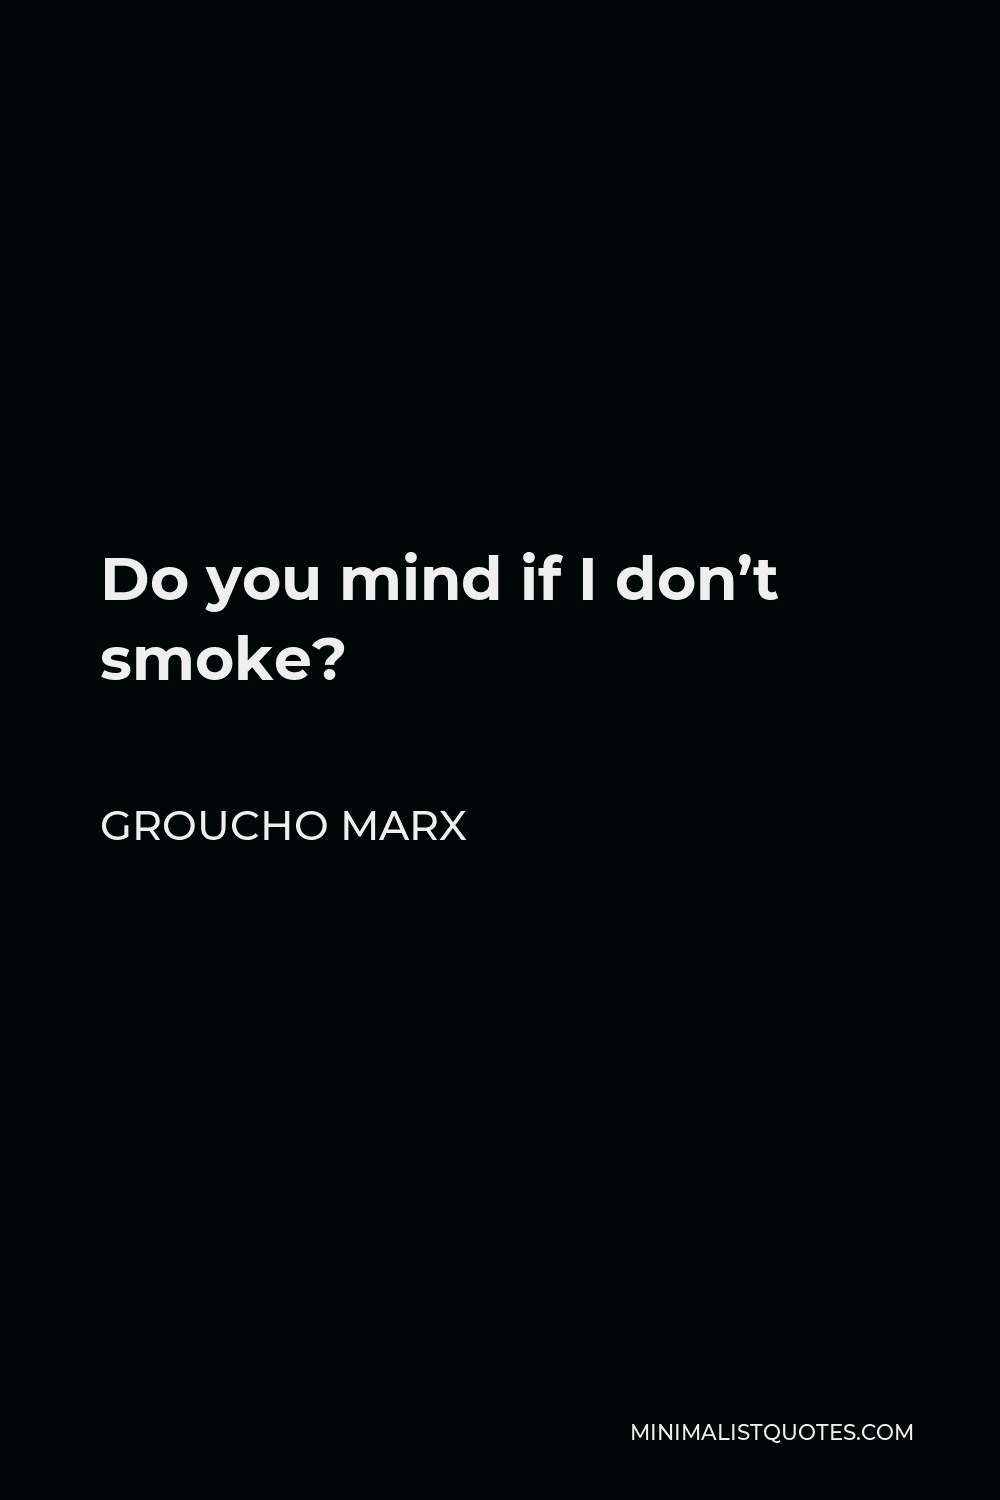 Groucho Marx Quote - Do you mind if I don’t smoke?